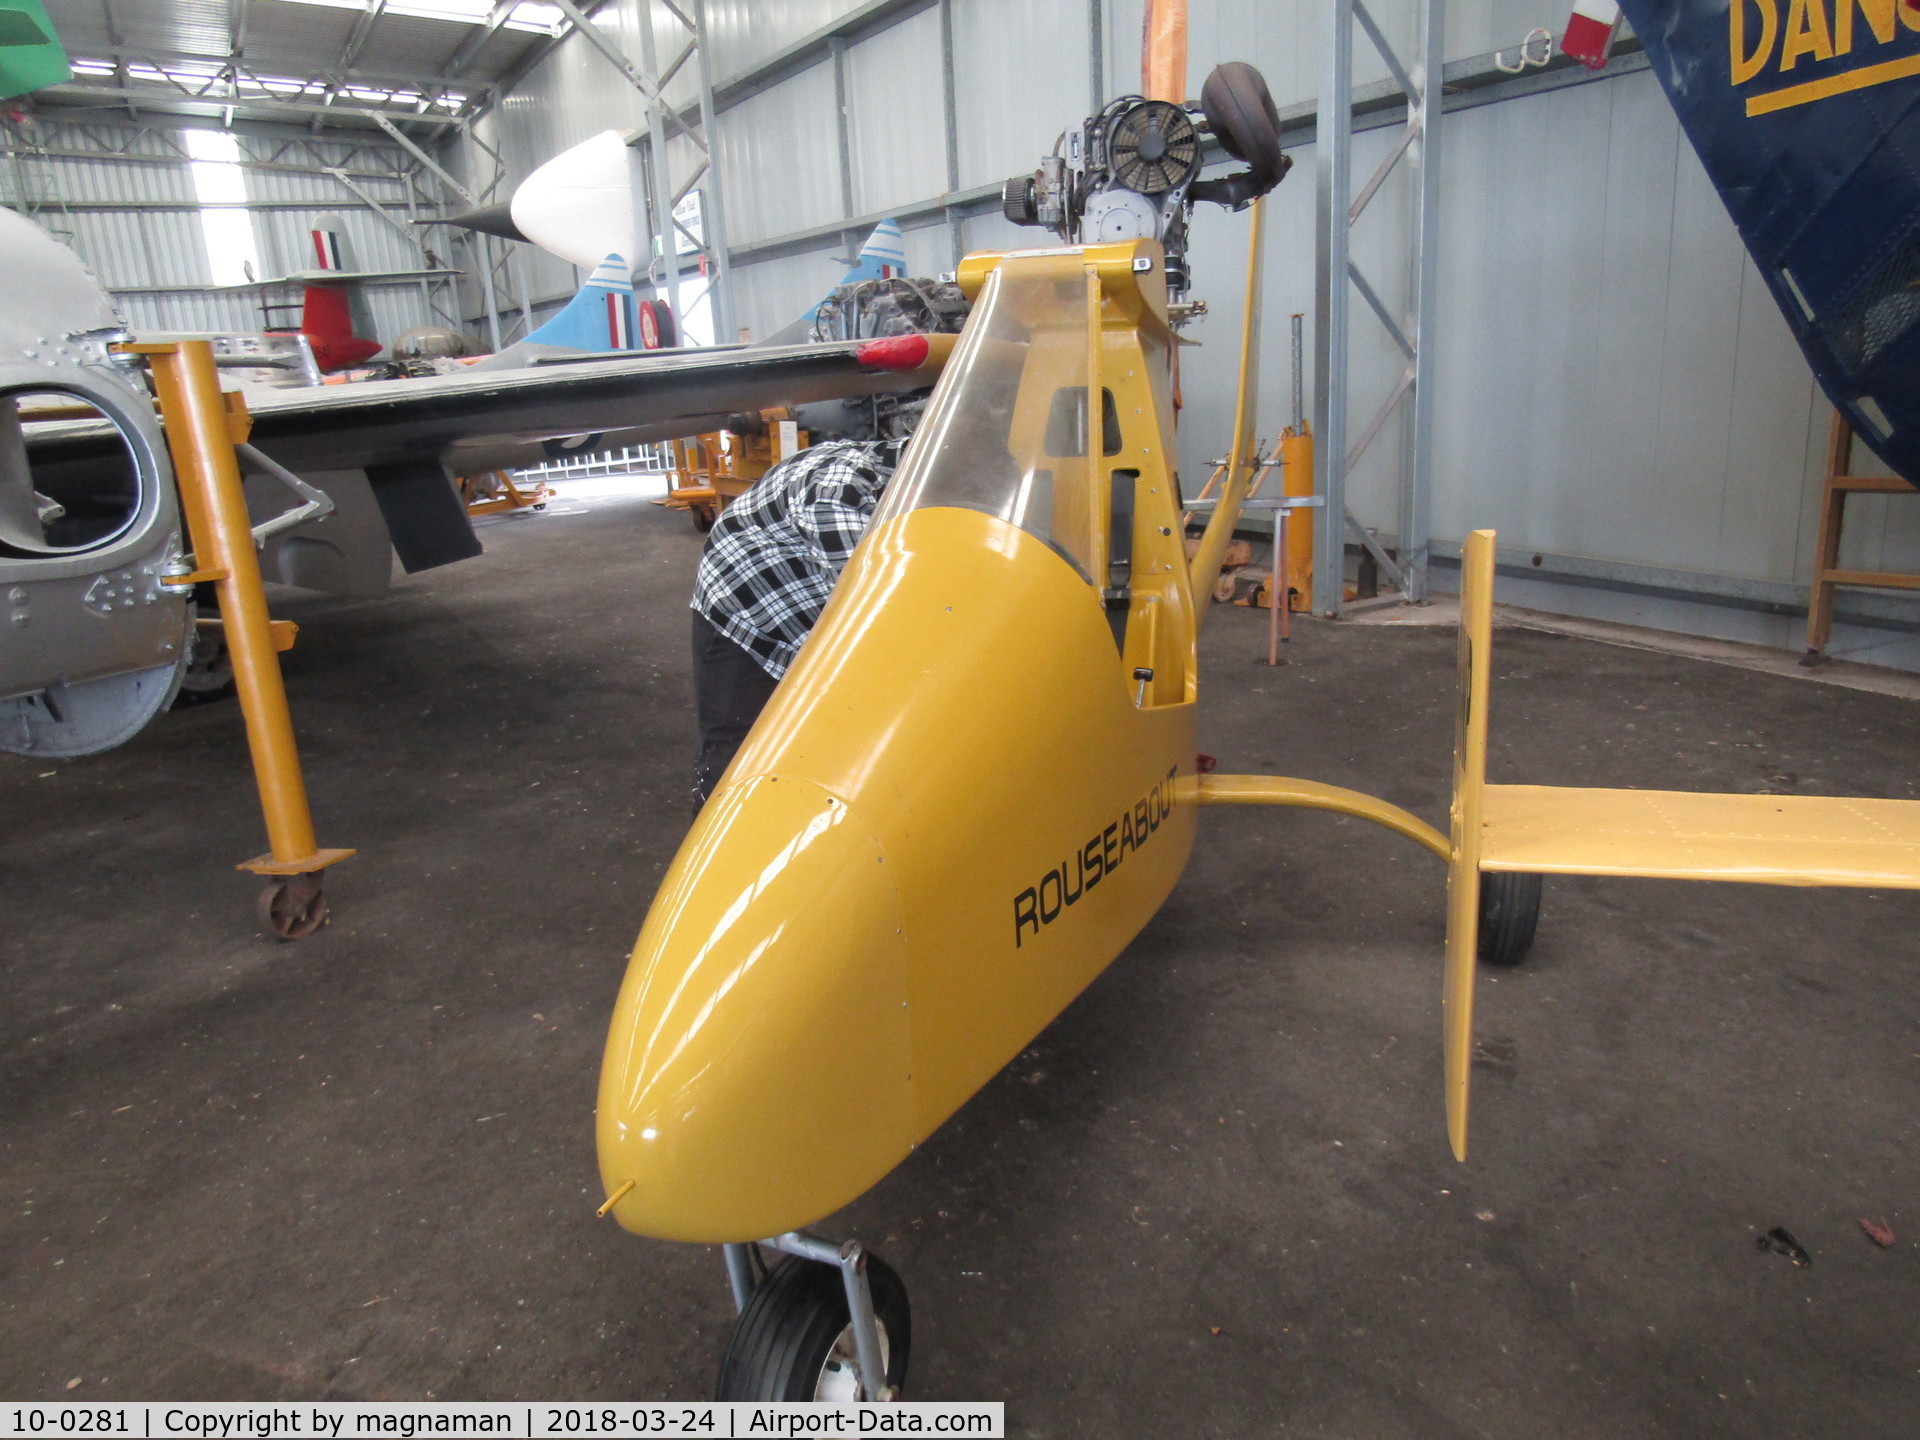 10-0281, Seabird Aviation Rouseabout C/N 003, At Caloundra Museum